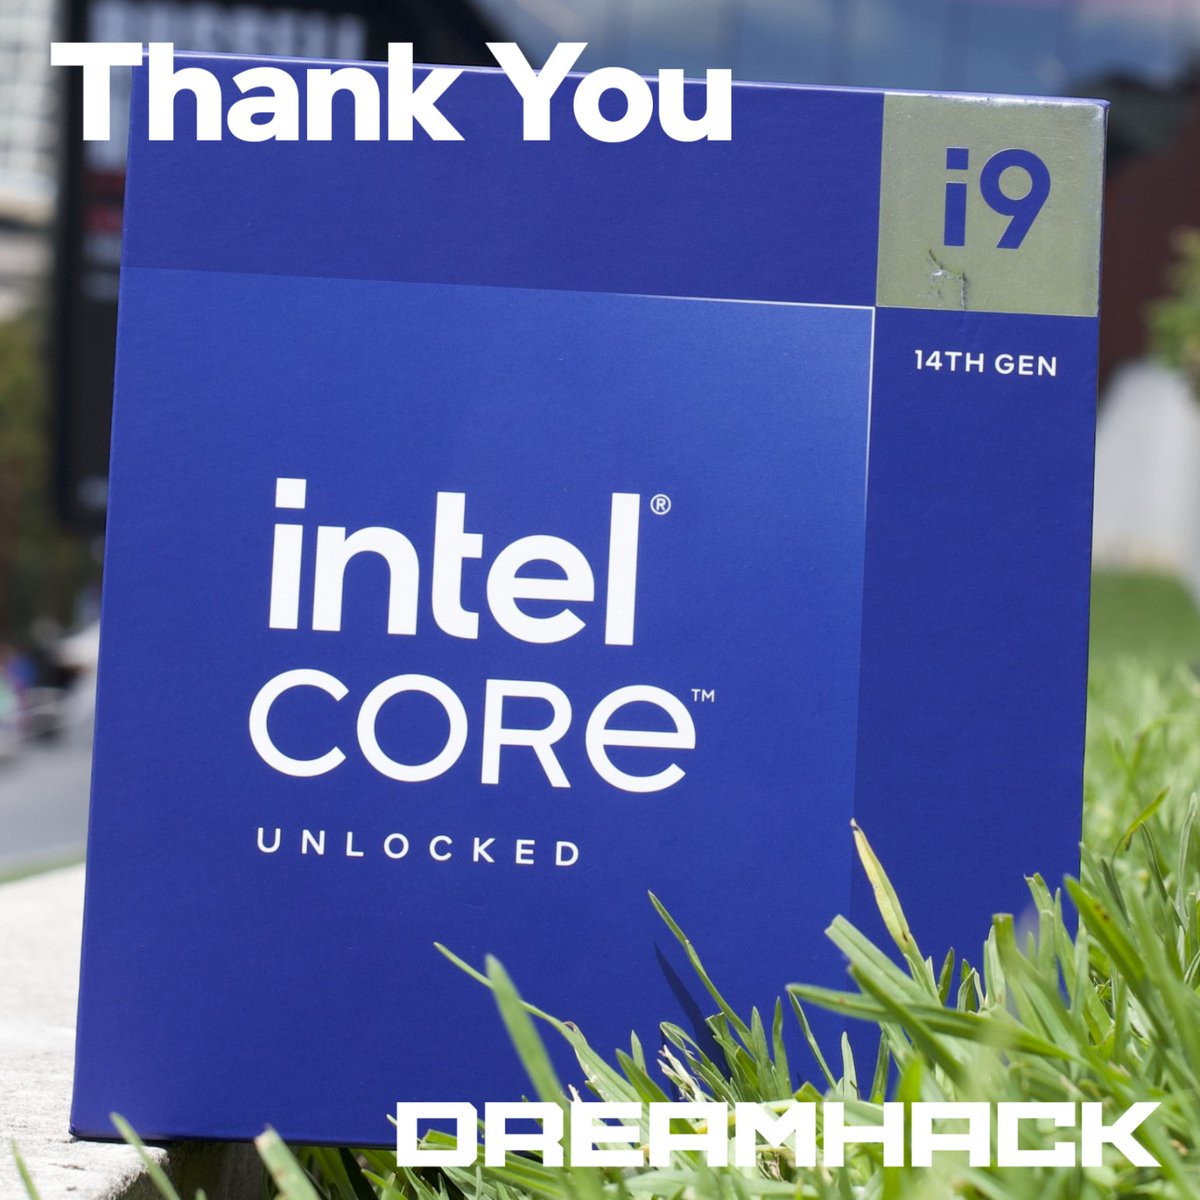 We hope you all had an amazing time at Dreamhack this year!

Please sound off below what your favourite part of this year's Dreamhack was - we'd also love to see any pictures you've taken on the booth or out and about with your Intel merch

#IntelDH2024